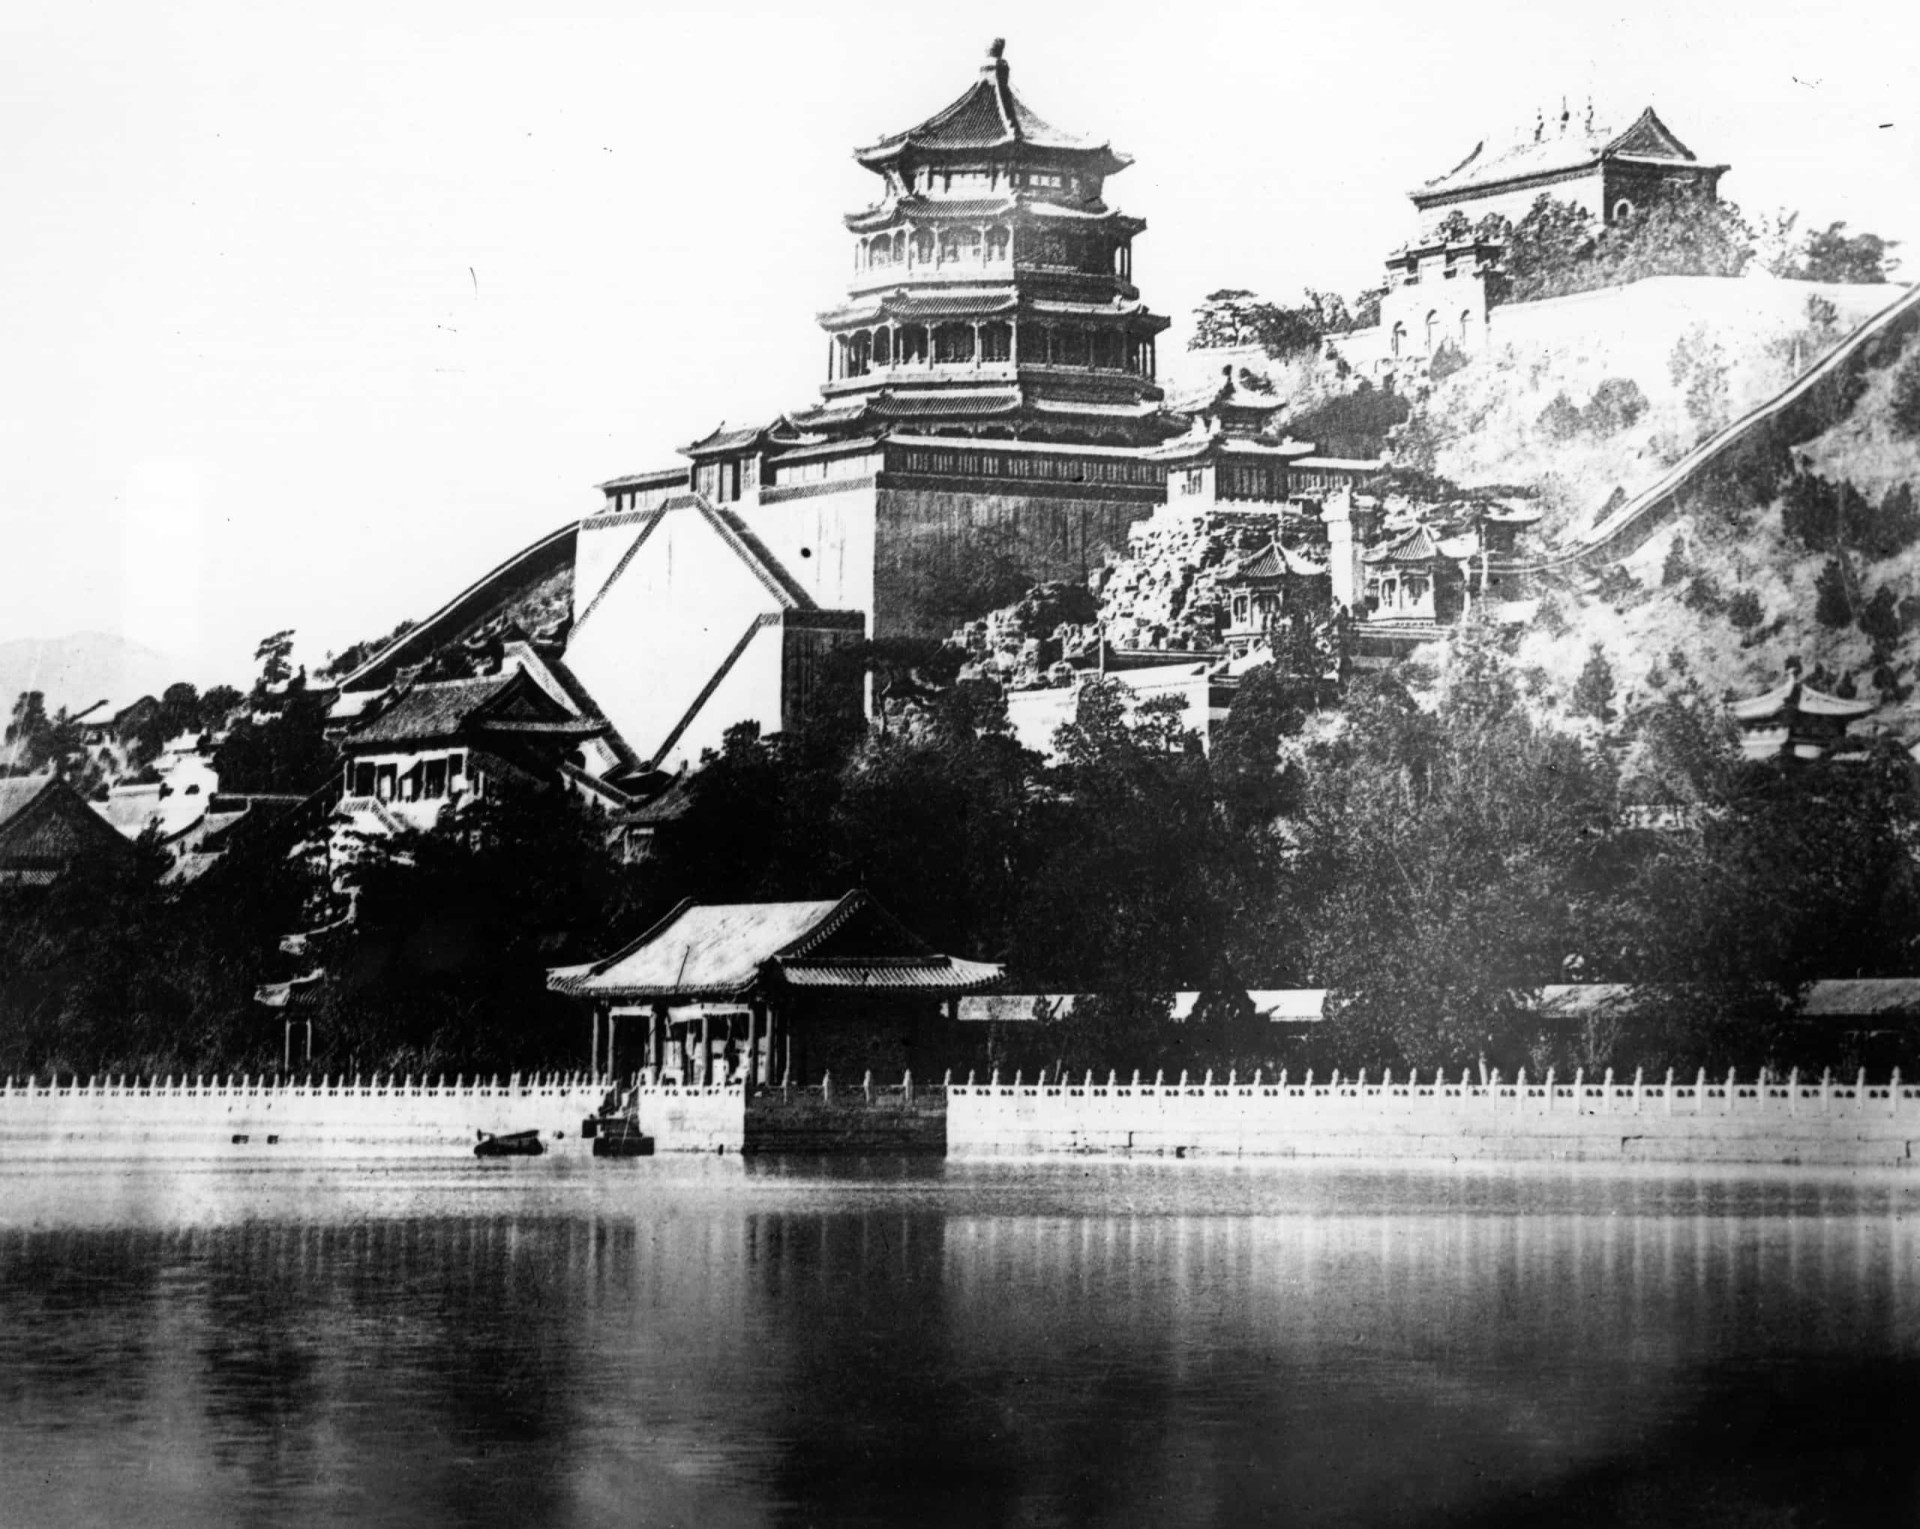 The Summer Palace looks onto the lake, located in former Peking (Beijing). It was built back in 1750, and the photo was taken roughly 100 years later.